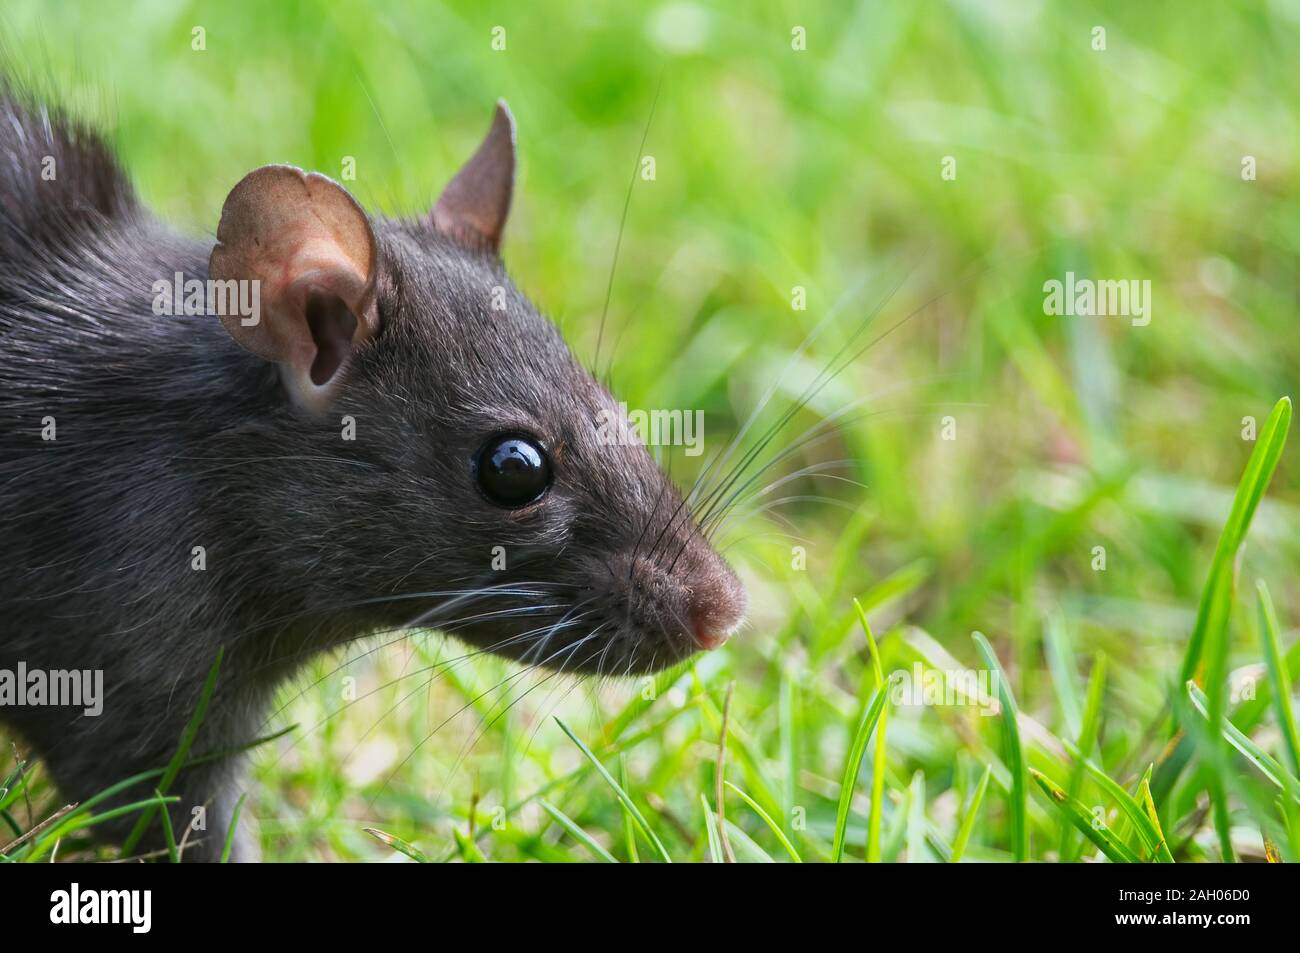 Common Black rat (Rattus rattus) profile capturing the whiskers, beady eyes and ears. Captured in a backyard location. Stock Photo